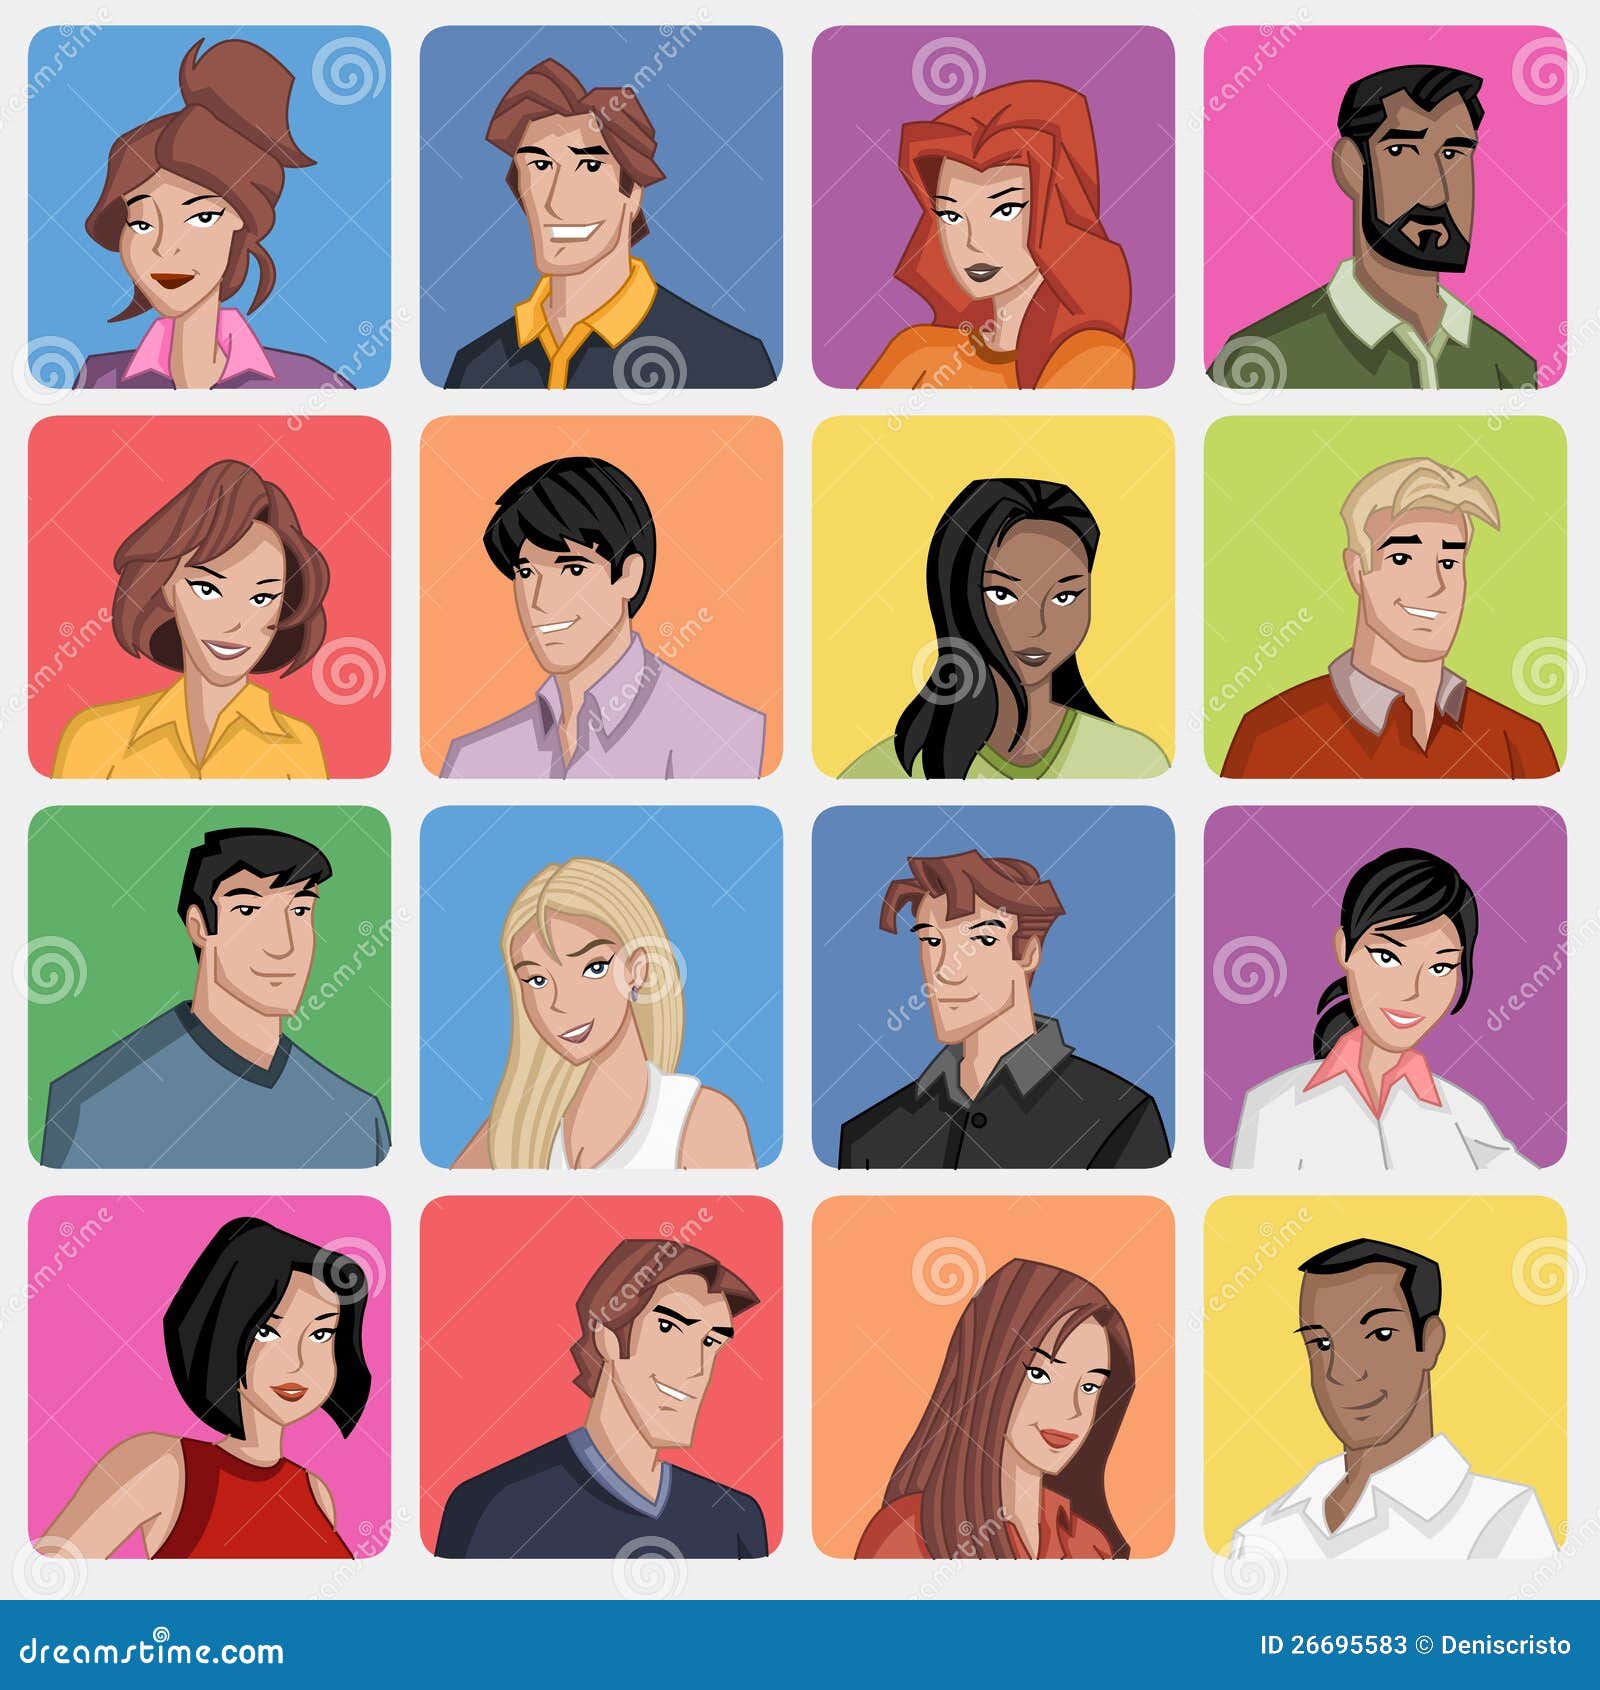 animated people faces